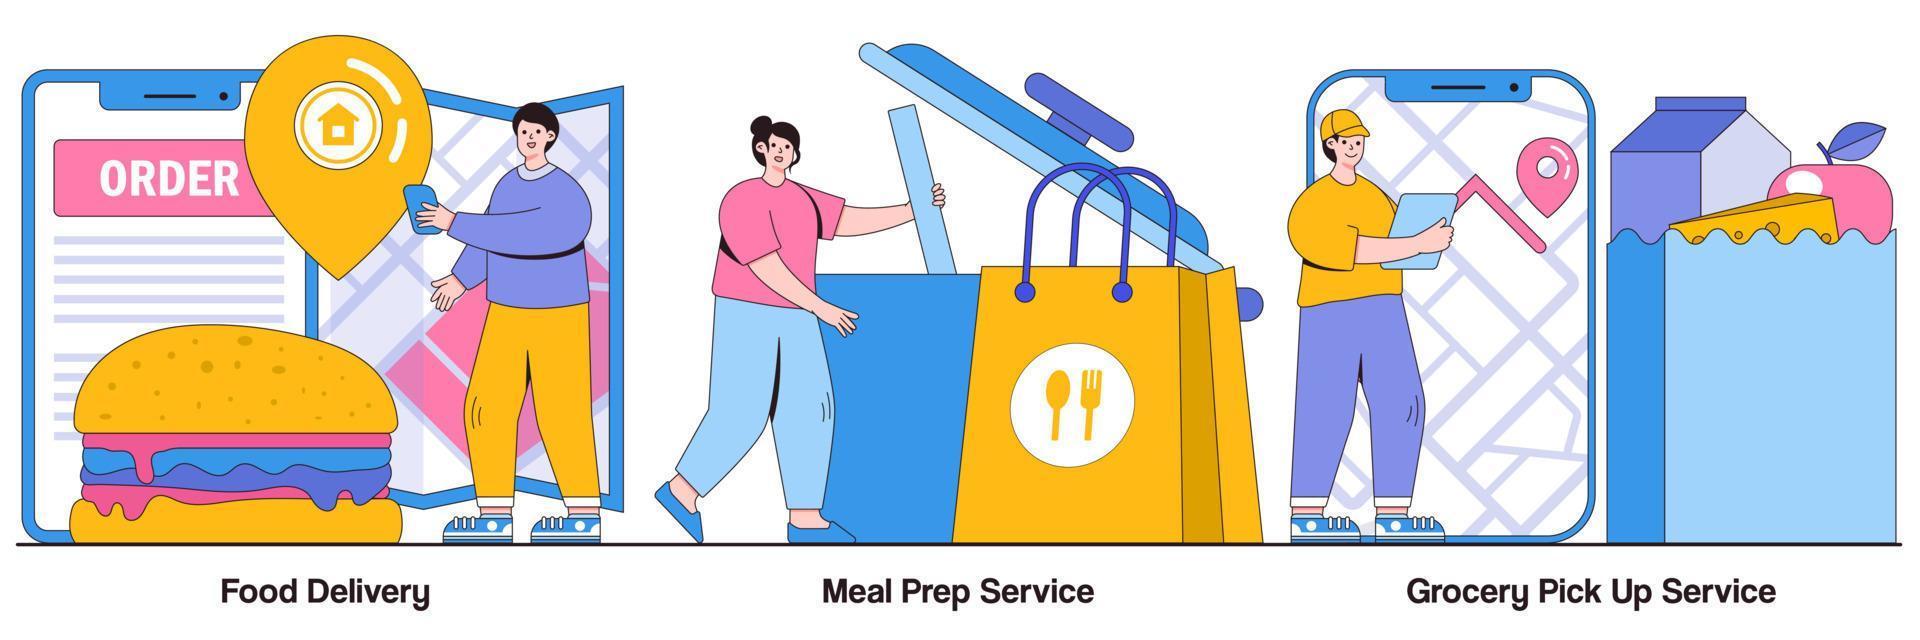 Food Delivery, Meal Prep Service, Grocery Pick Up Service with People Characters Illustrations Pack vector